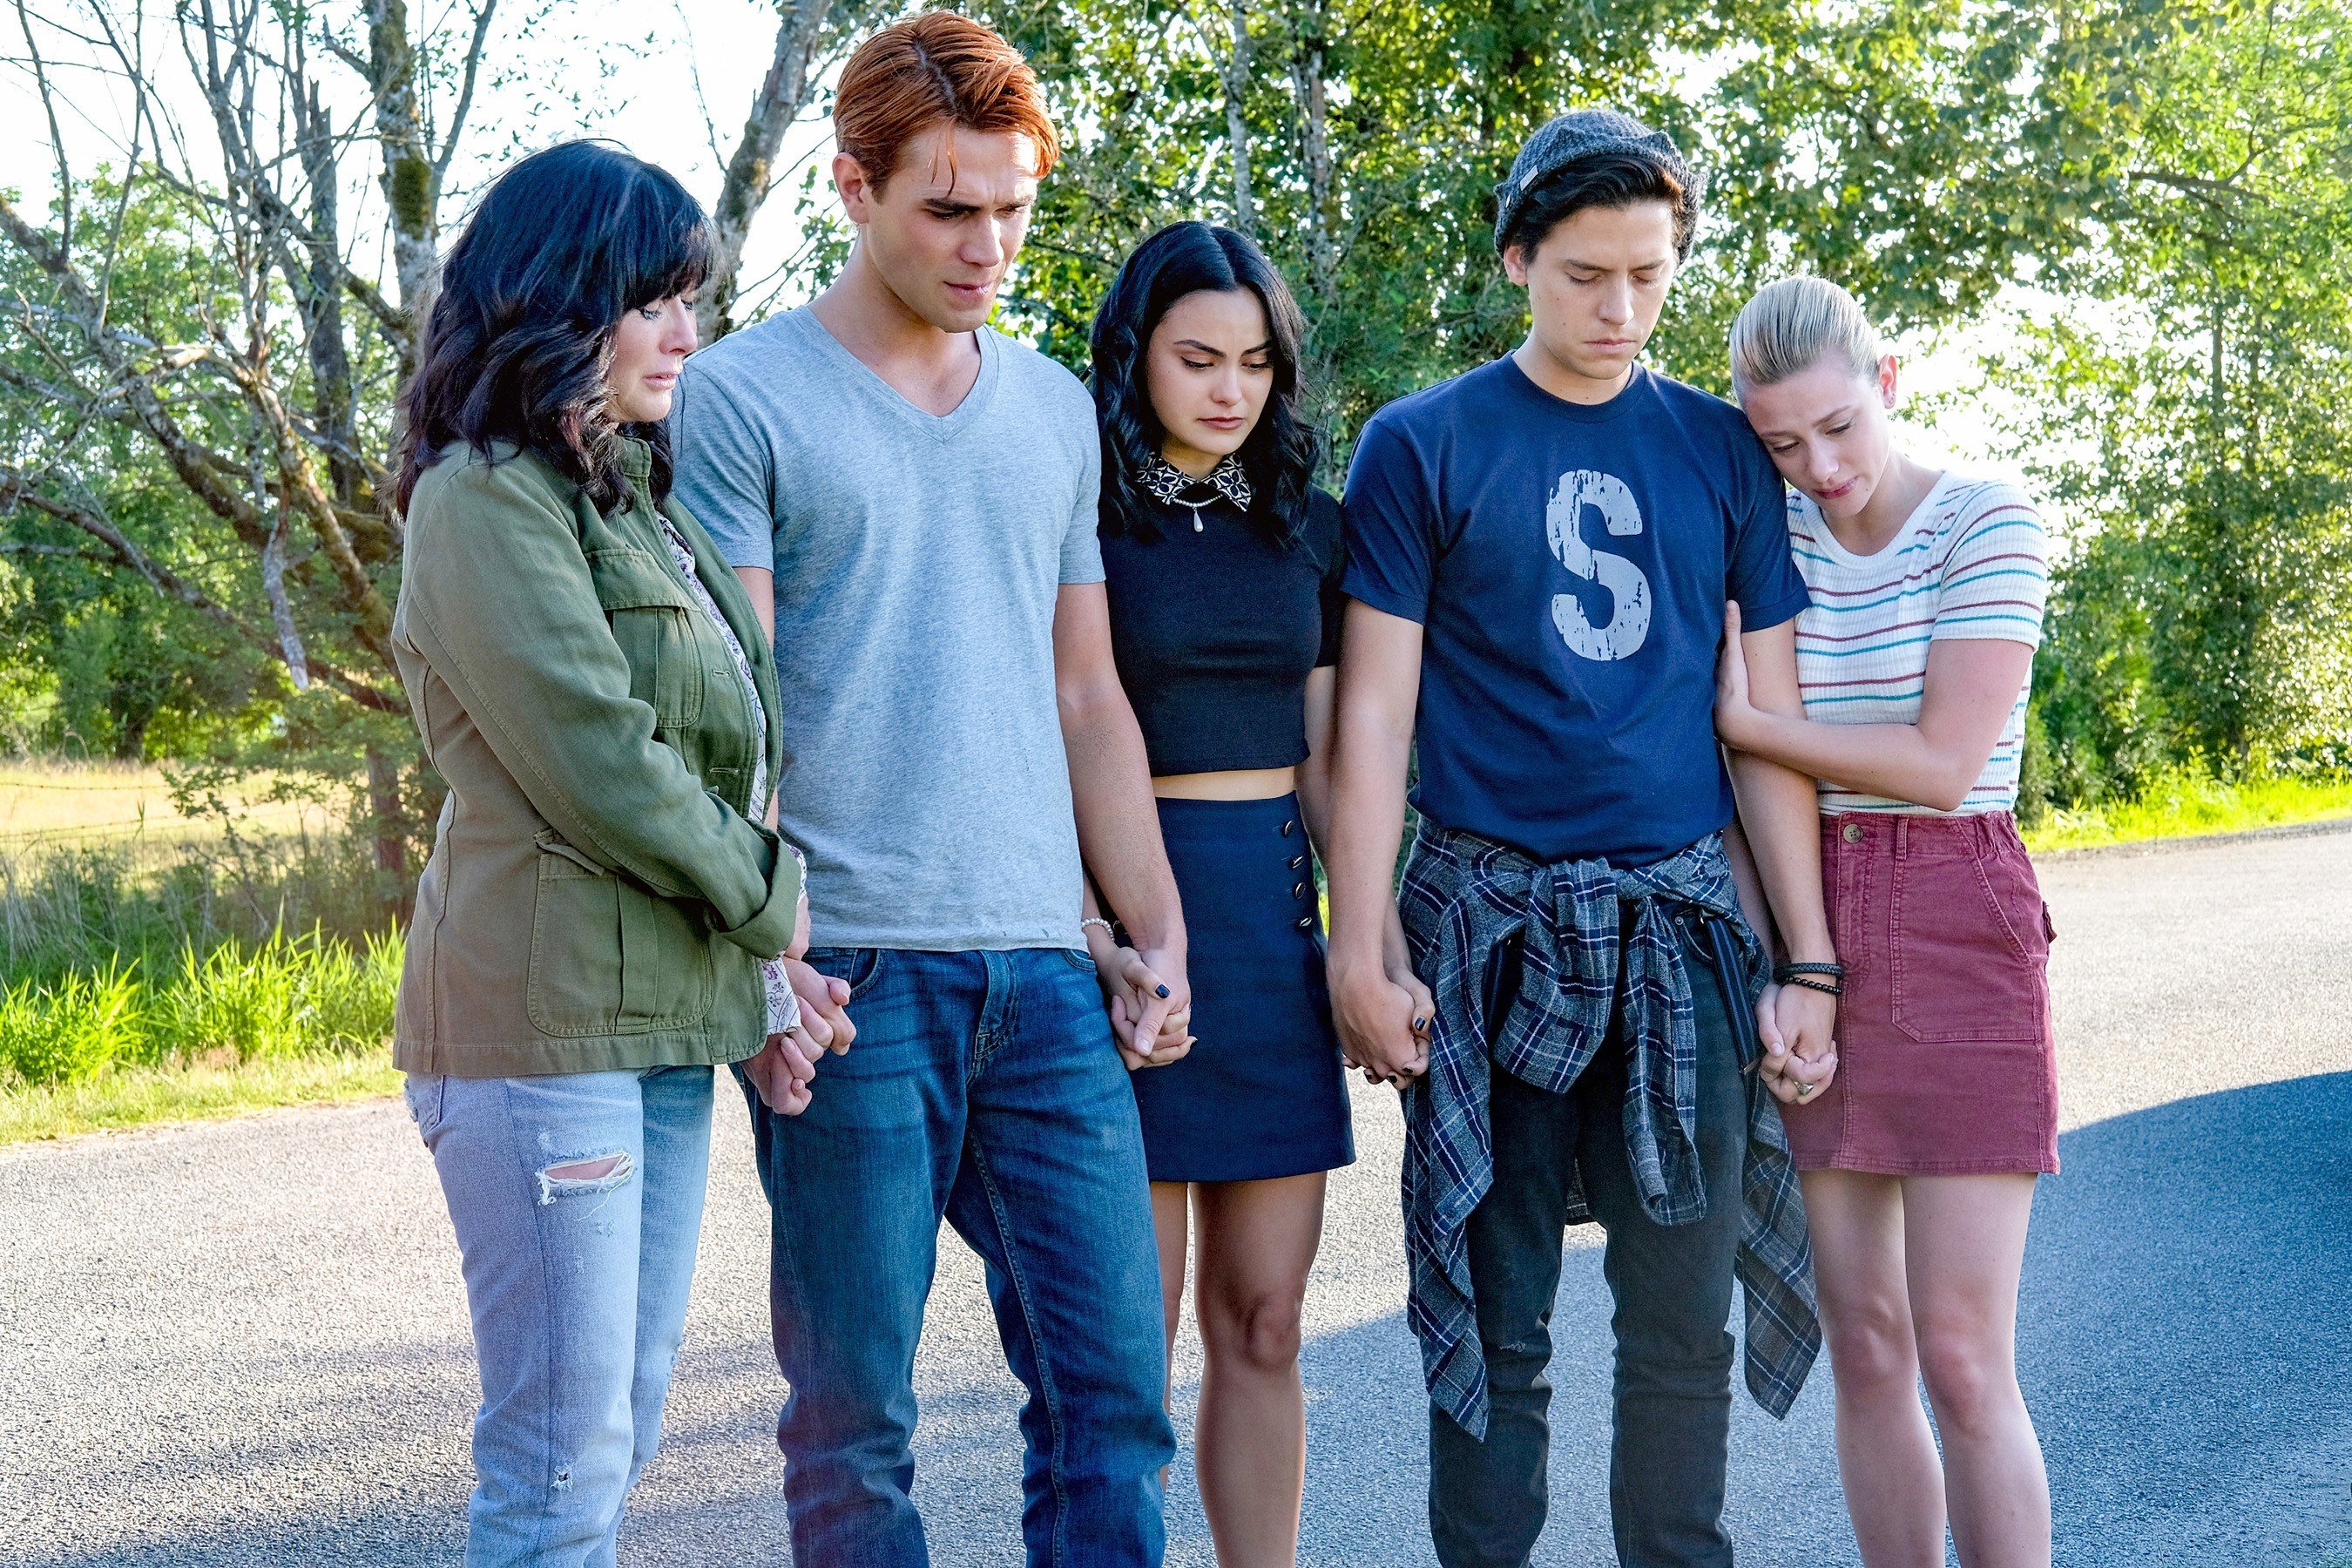 Archie and his mom and Veronica and Jughead and Betty grieve Fred